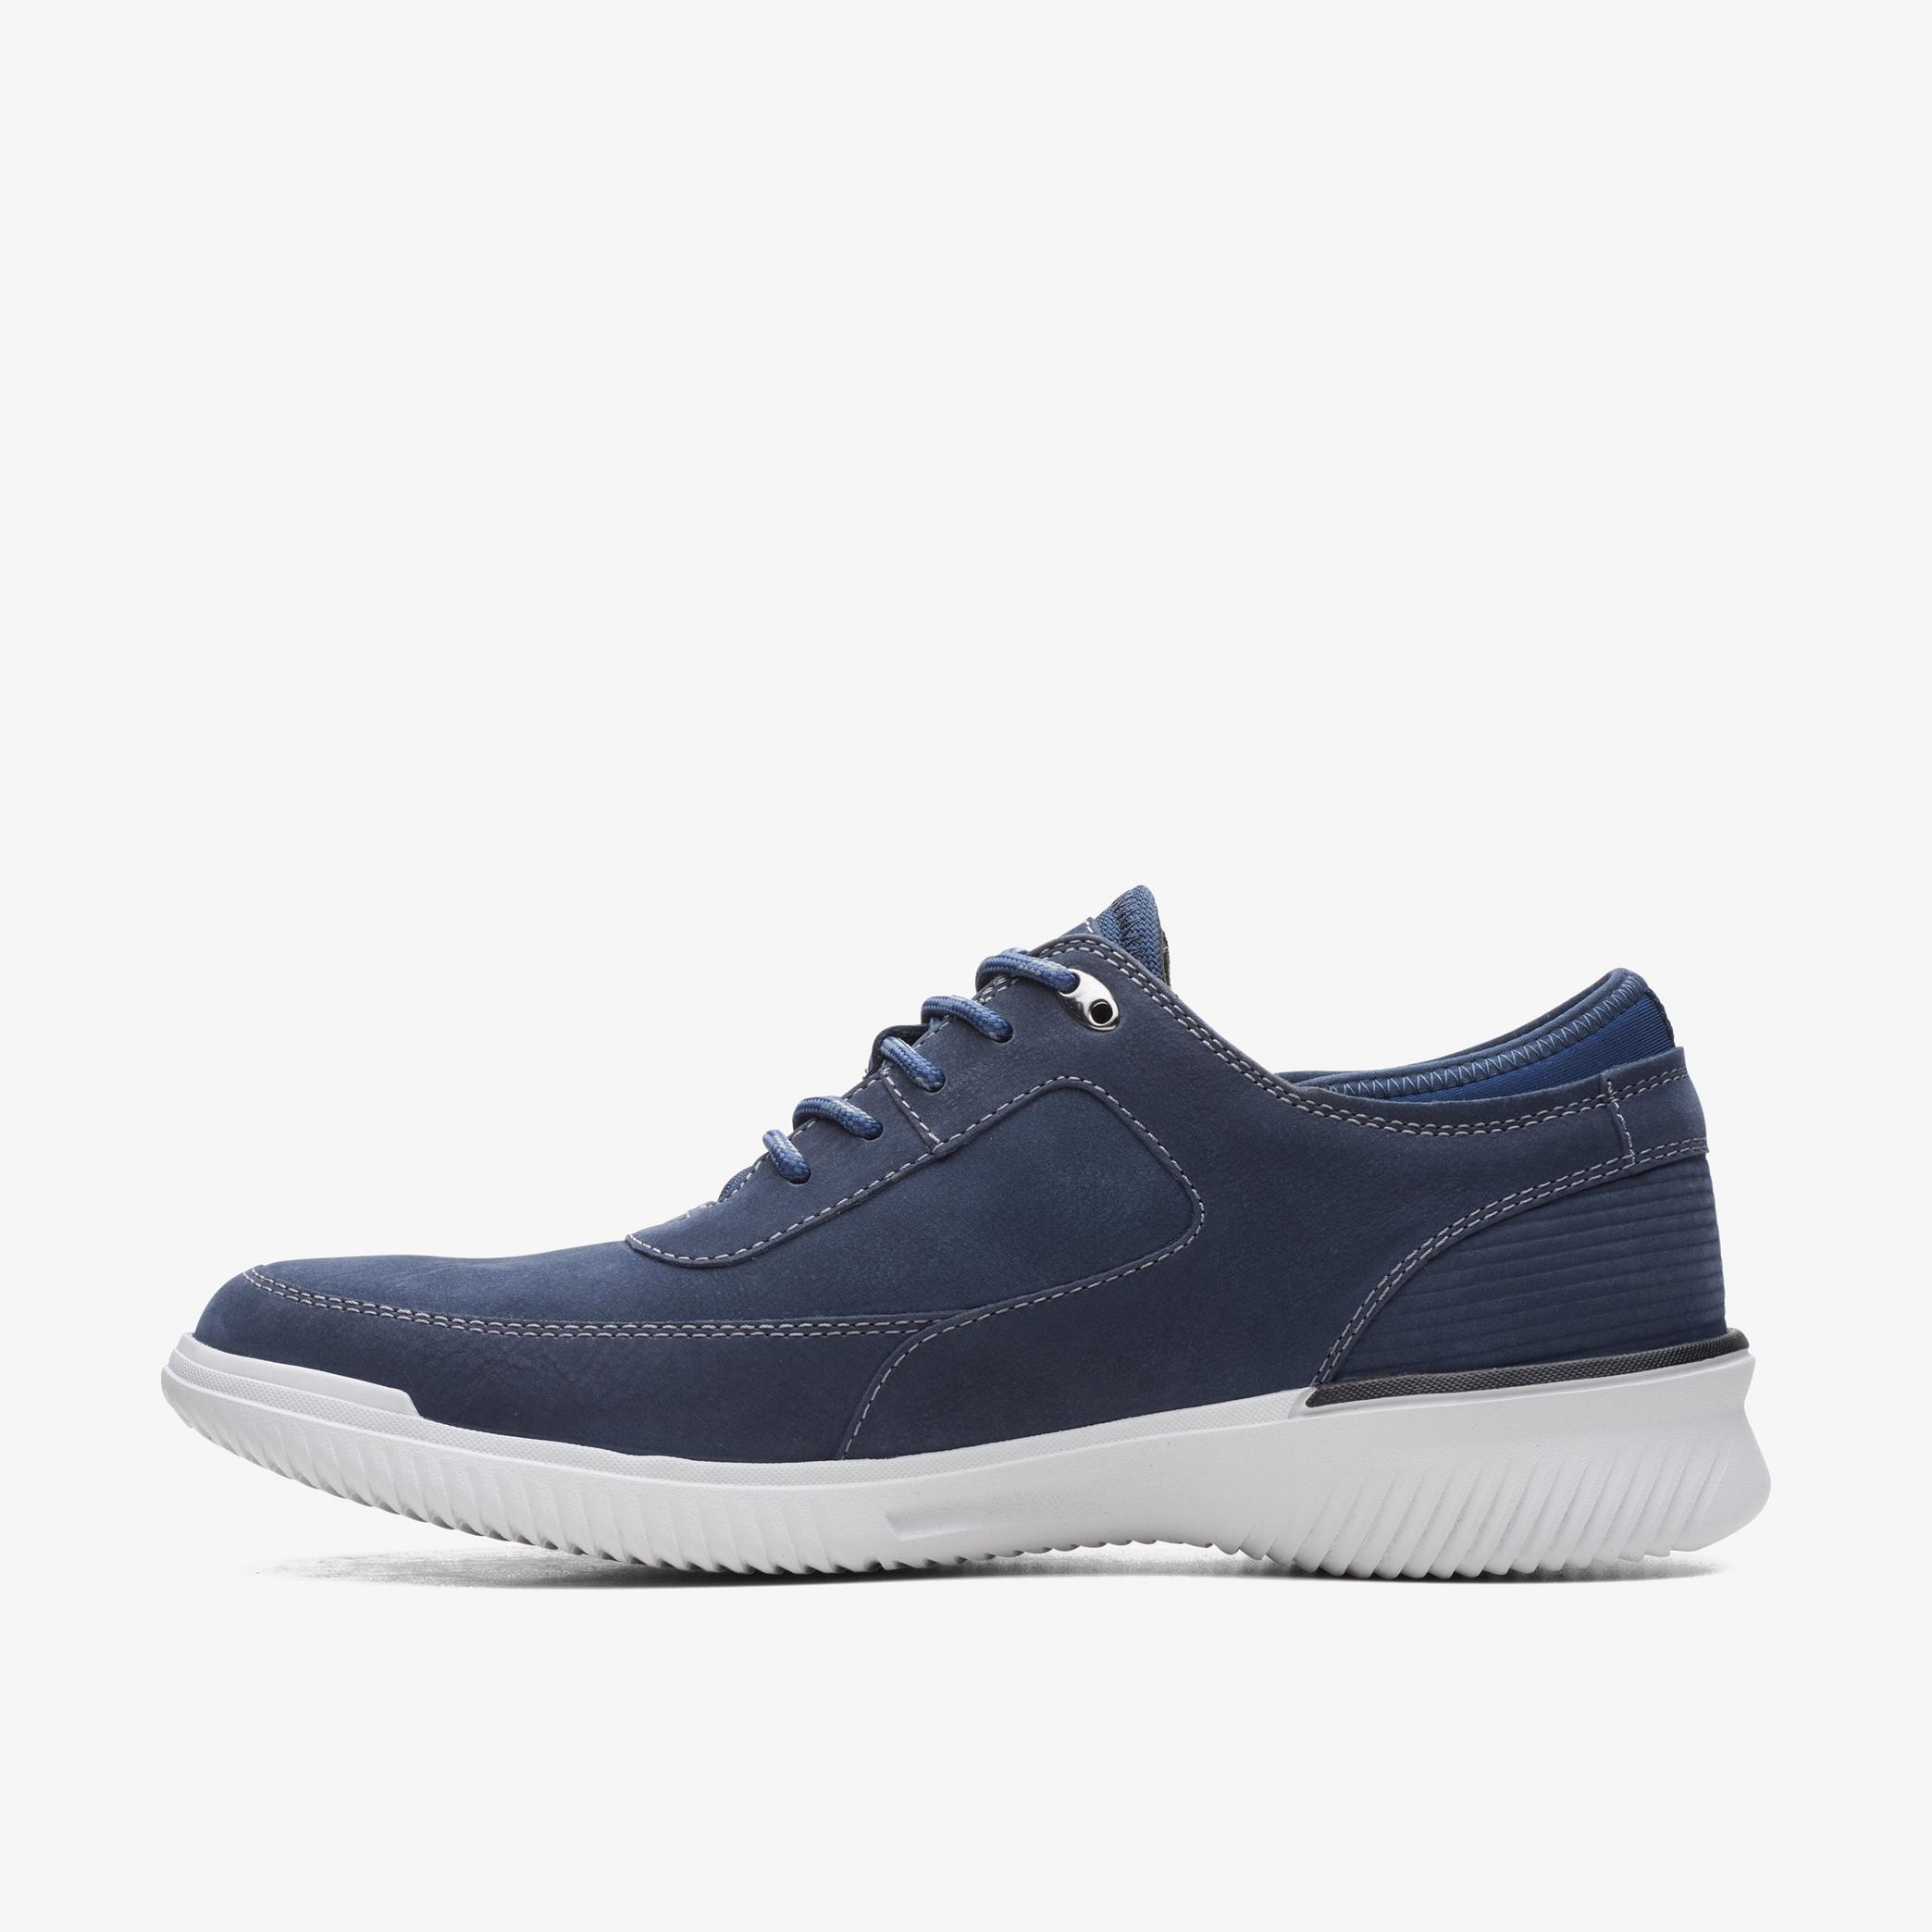 Donaway Lace Navy Nubuck Shoes, view 2 of 6